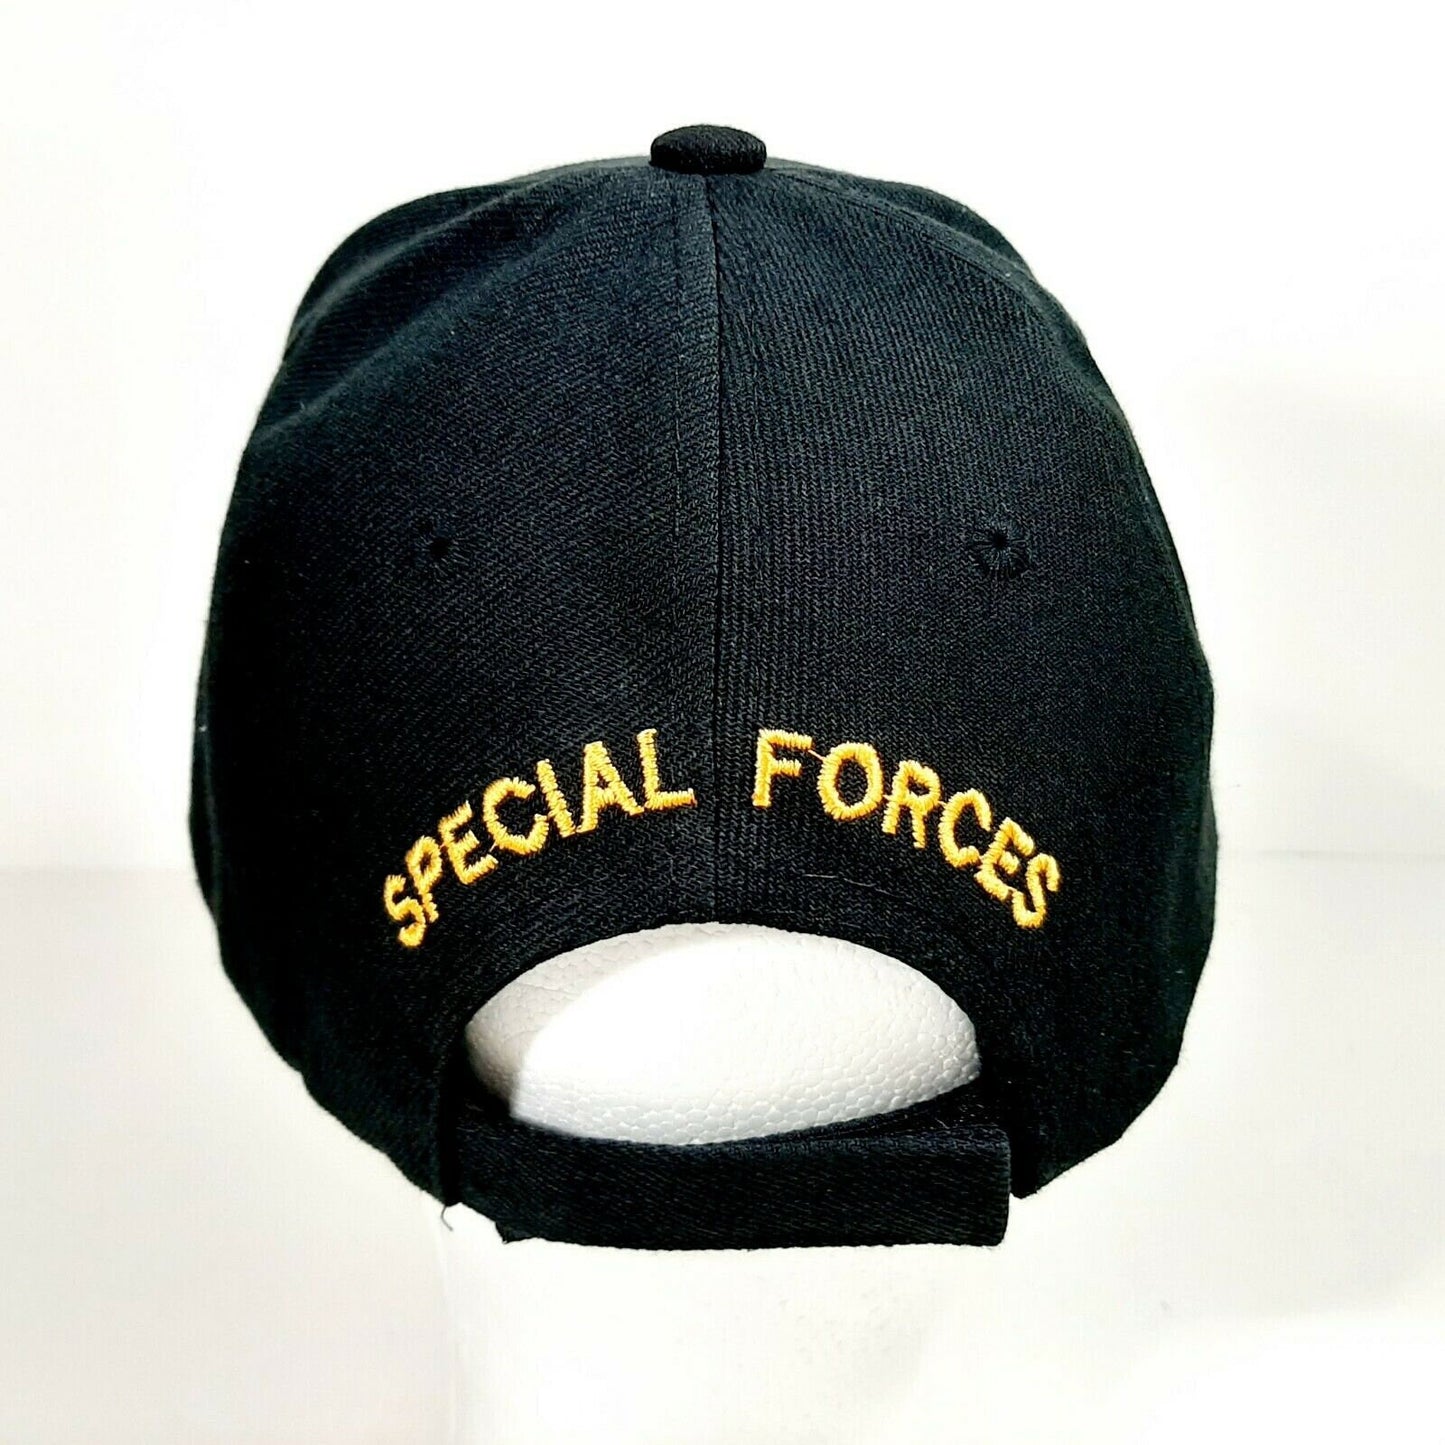 US Army Special Forces Green Beret Men's Ball Cap Hat Black Acrylic Embroidered